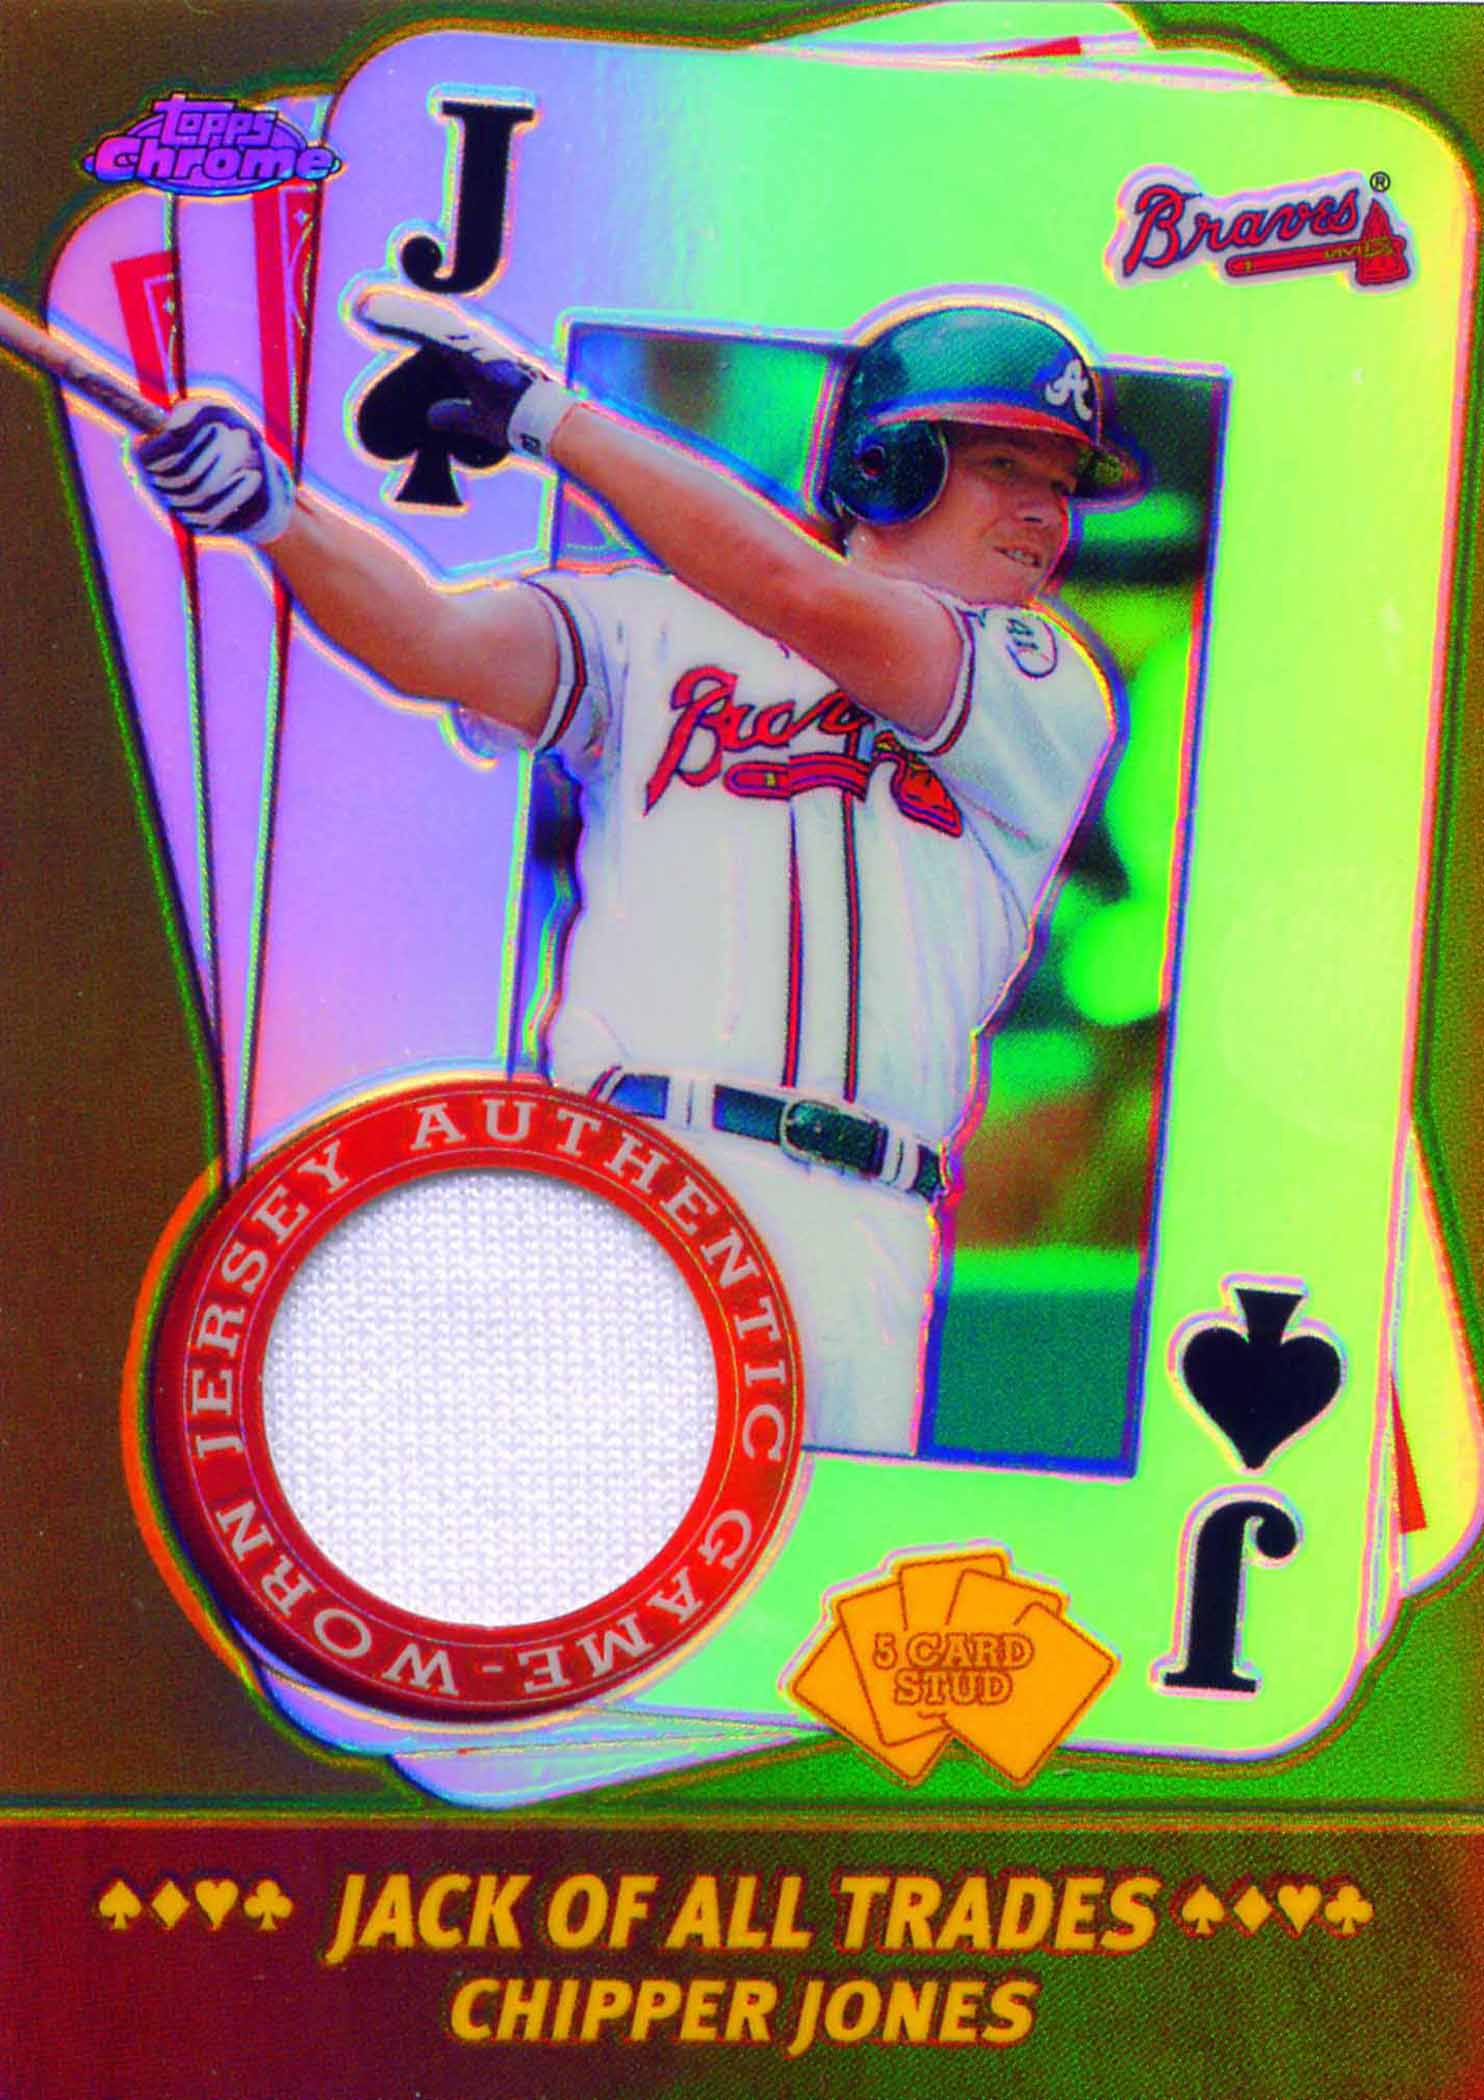 2002 Topps Chrome 5-Card Stud Jack of all Trades Relics Jersey